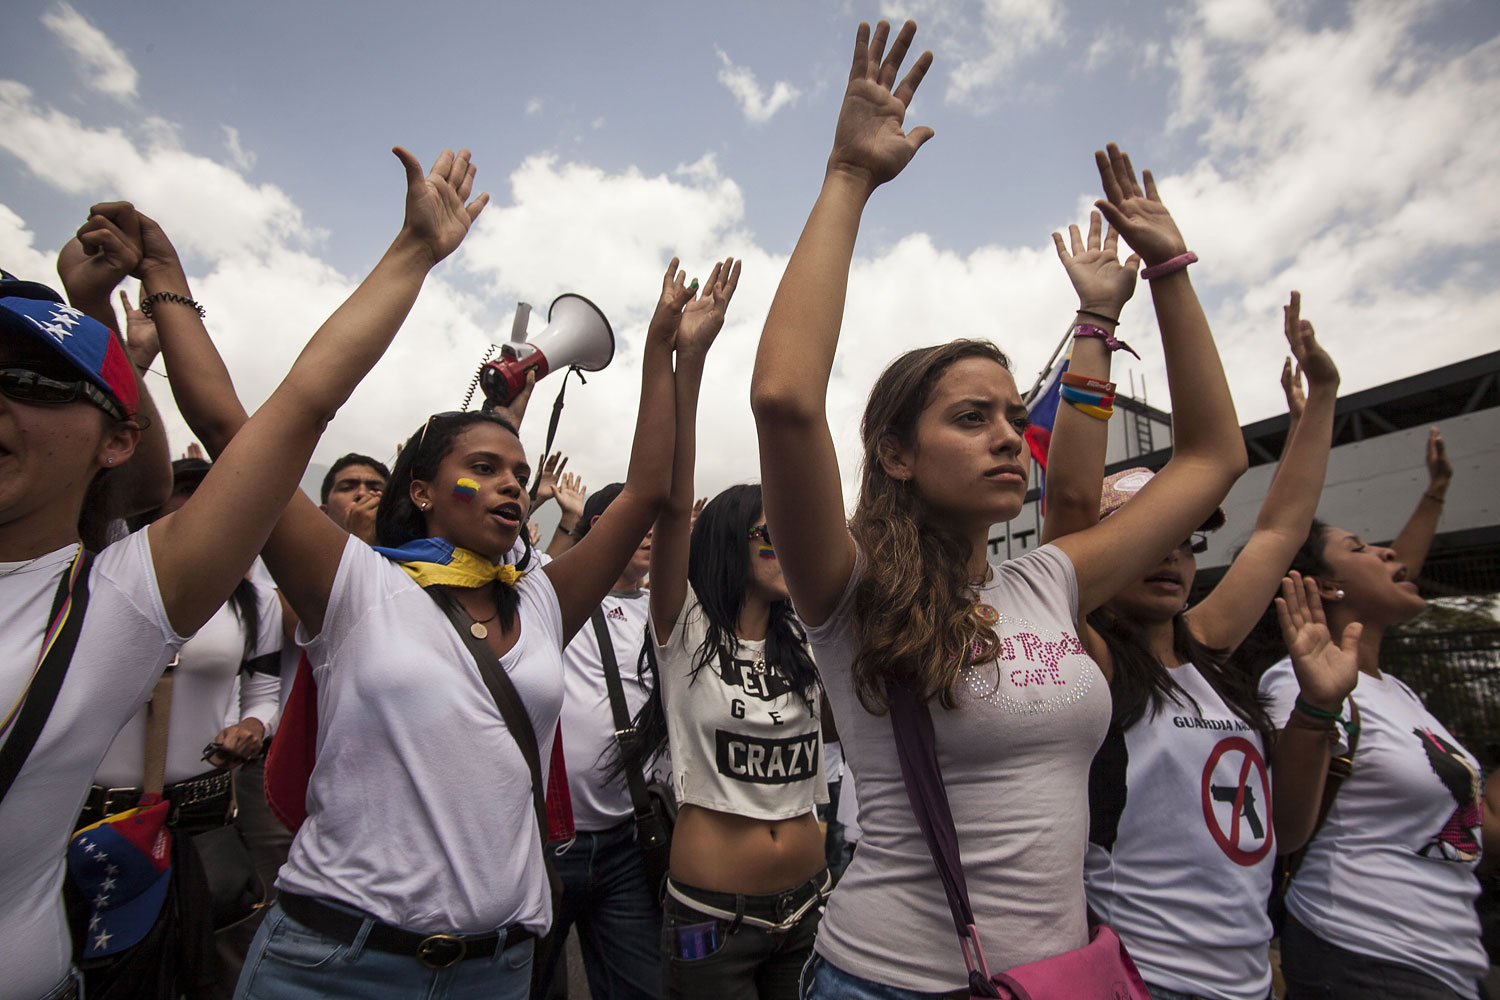 Protesters raise their hands in a sign of peace after the Bolivarian National Guard cut the march in two parts, not allowing part of the march to continue, Caracas, March 4, 2013. (Eduardo Leal—Polaris)